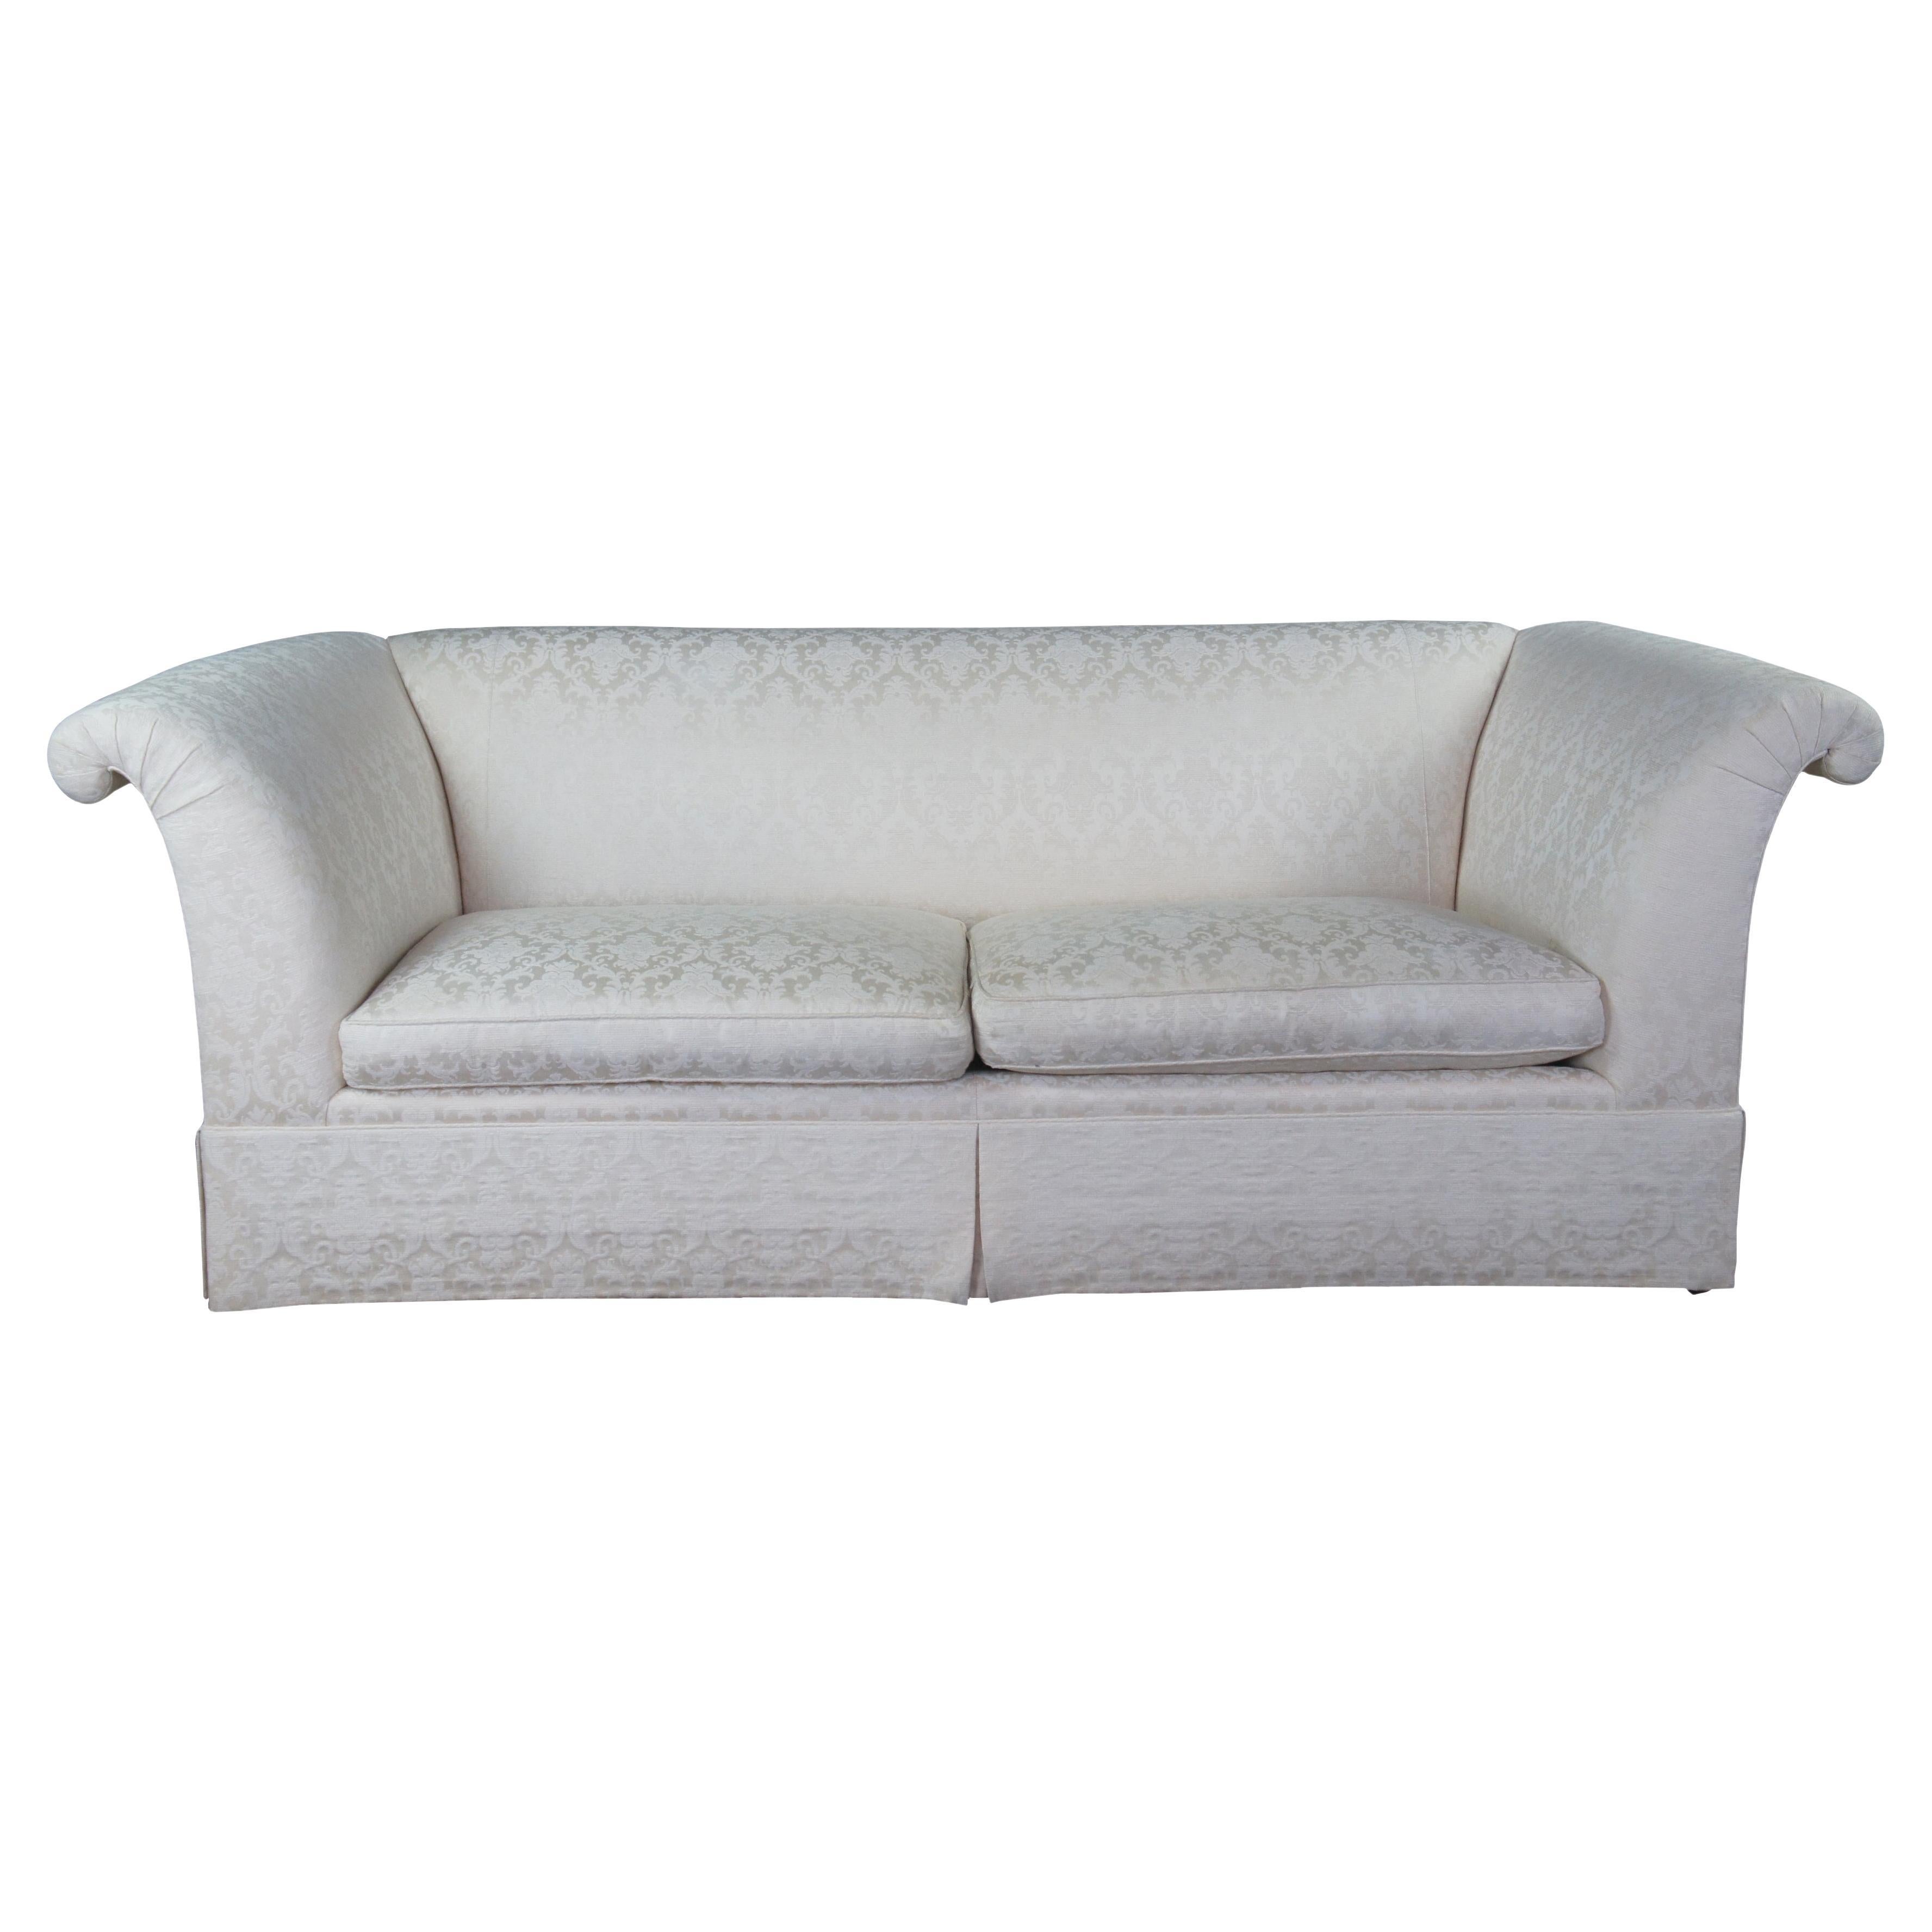 Baker Furniture French Tuxedo Roll Arm Down Filled Sofa Couch Love Seat Brocade